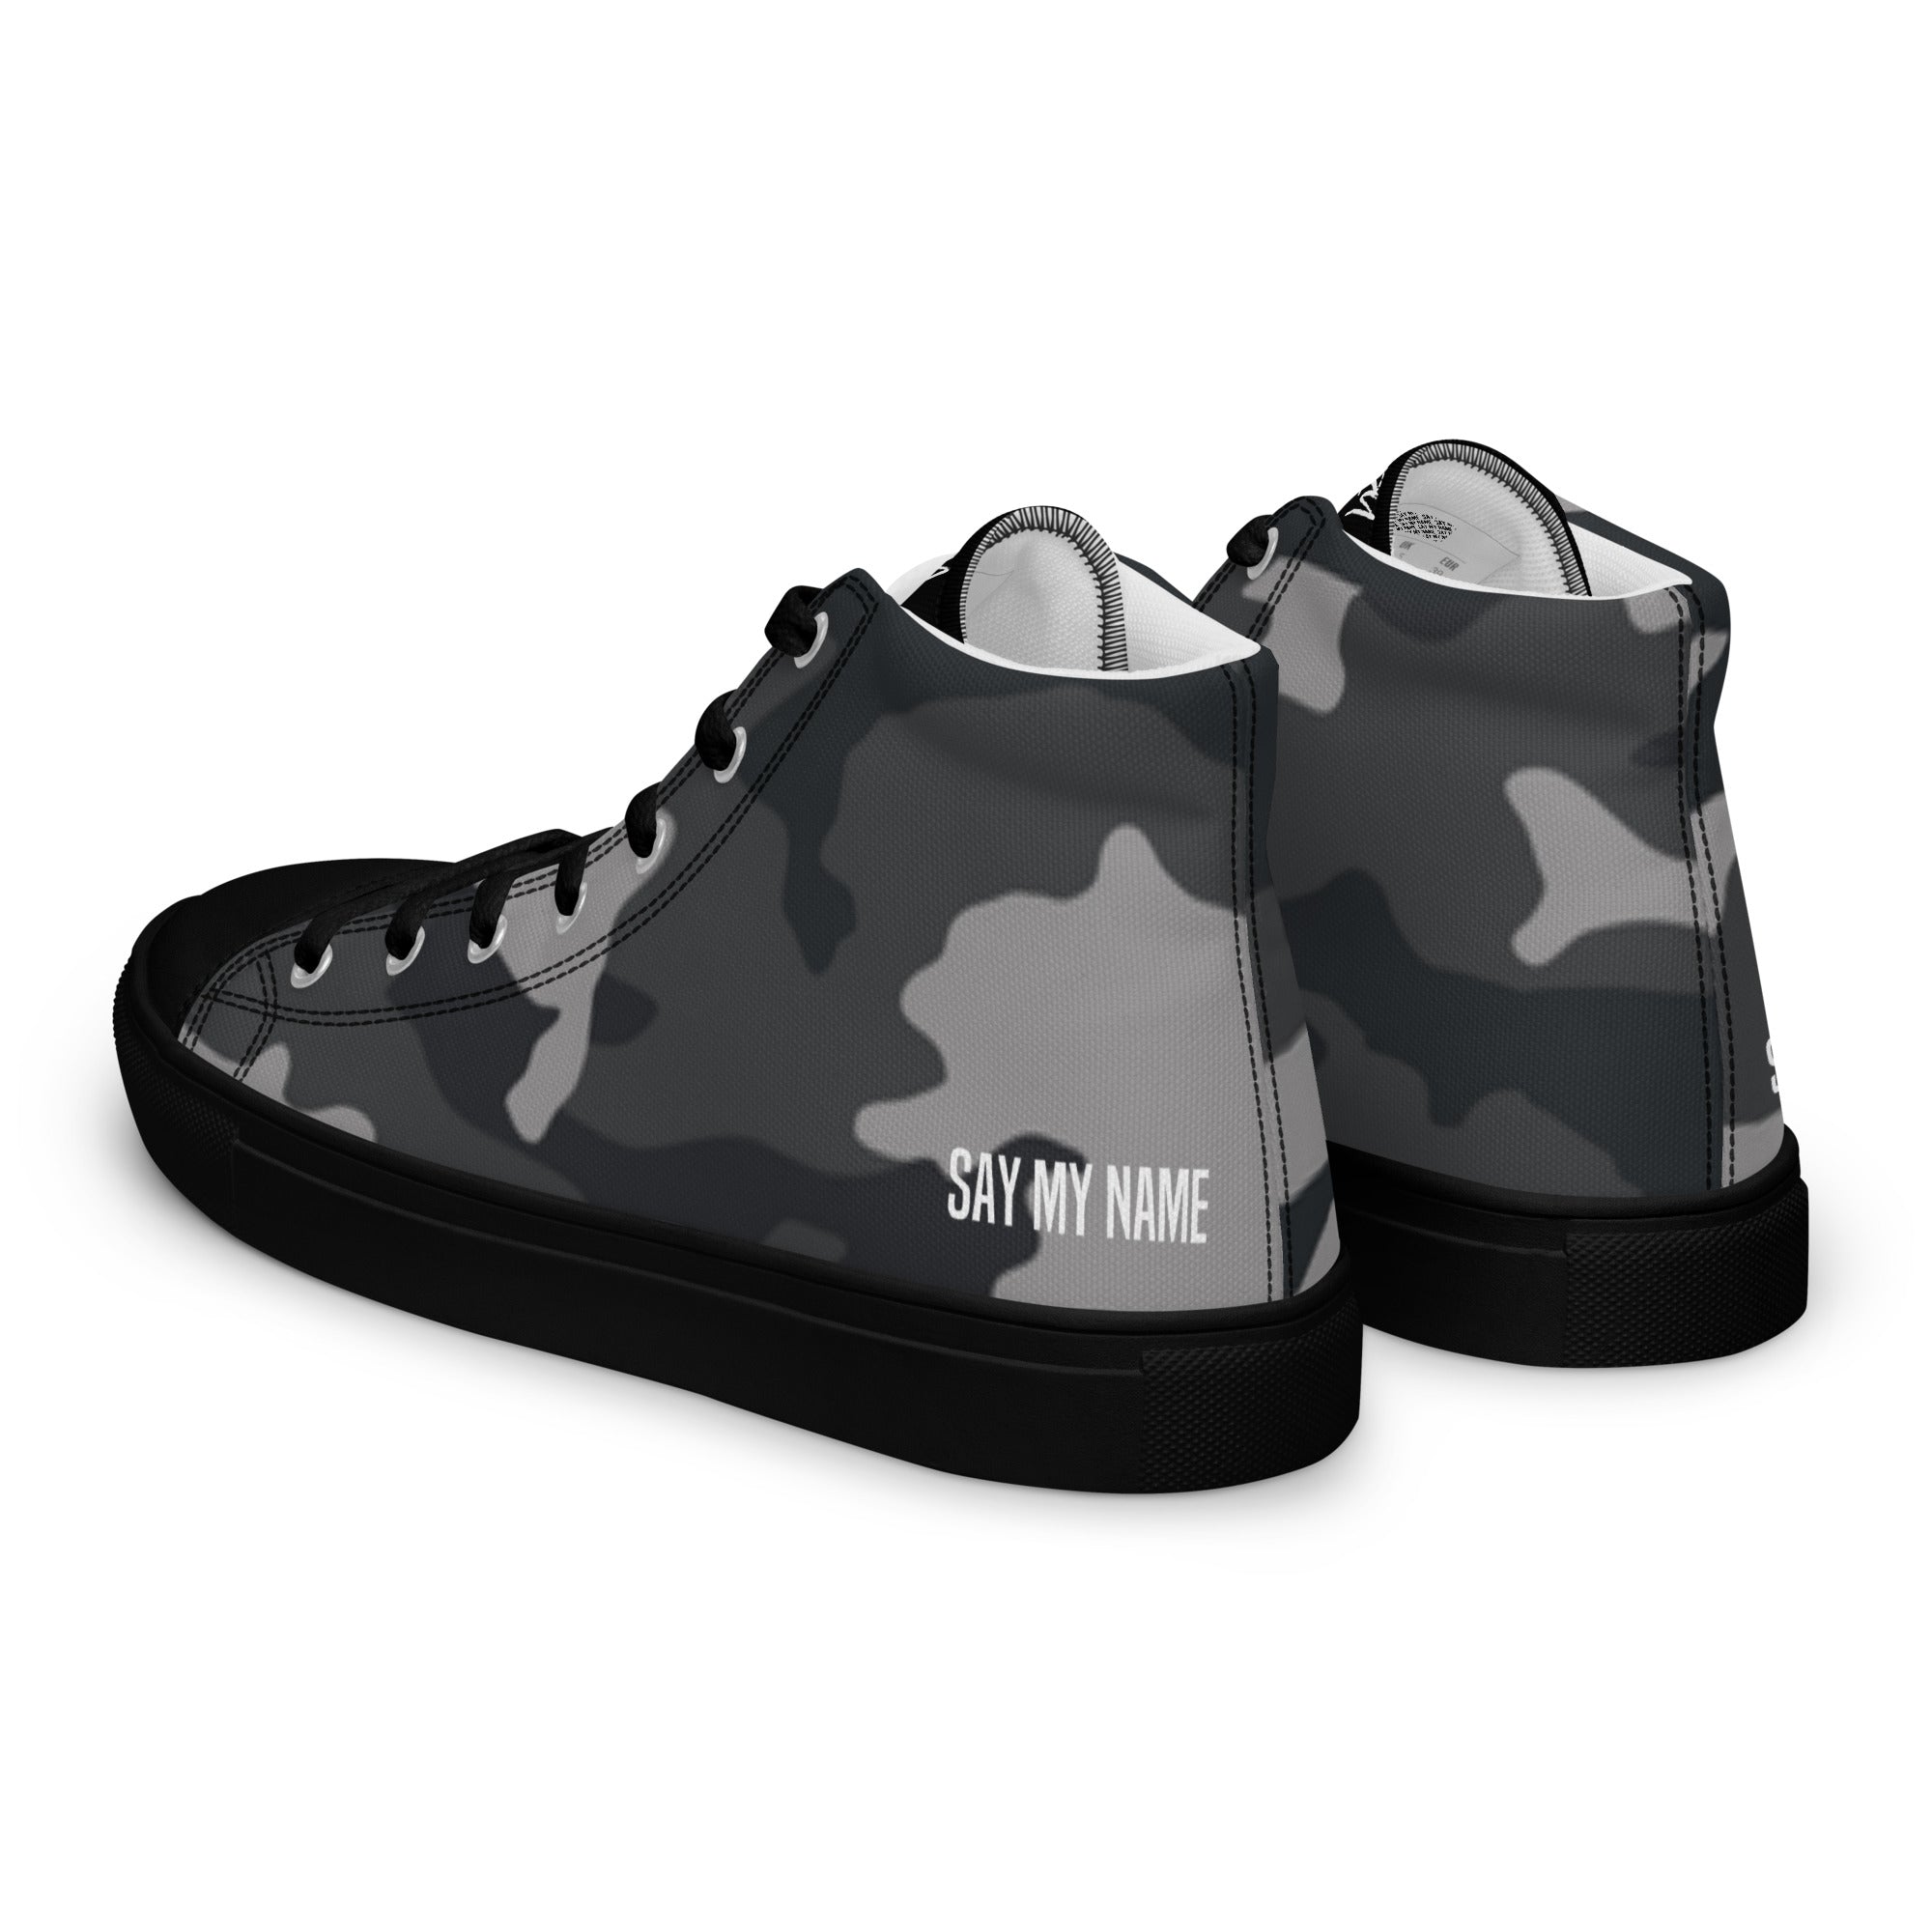 Baskets hautes camouflage gris en toile homme "SAY MY NAME"